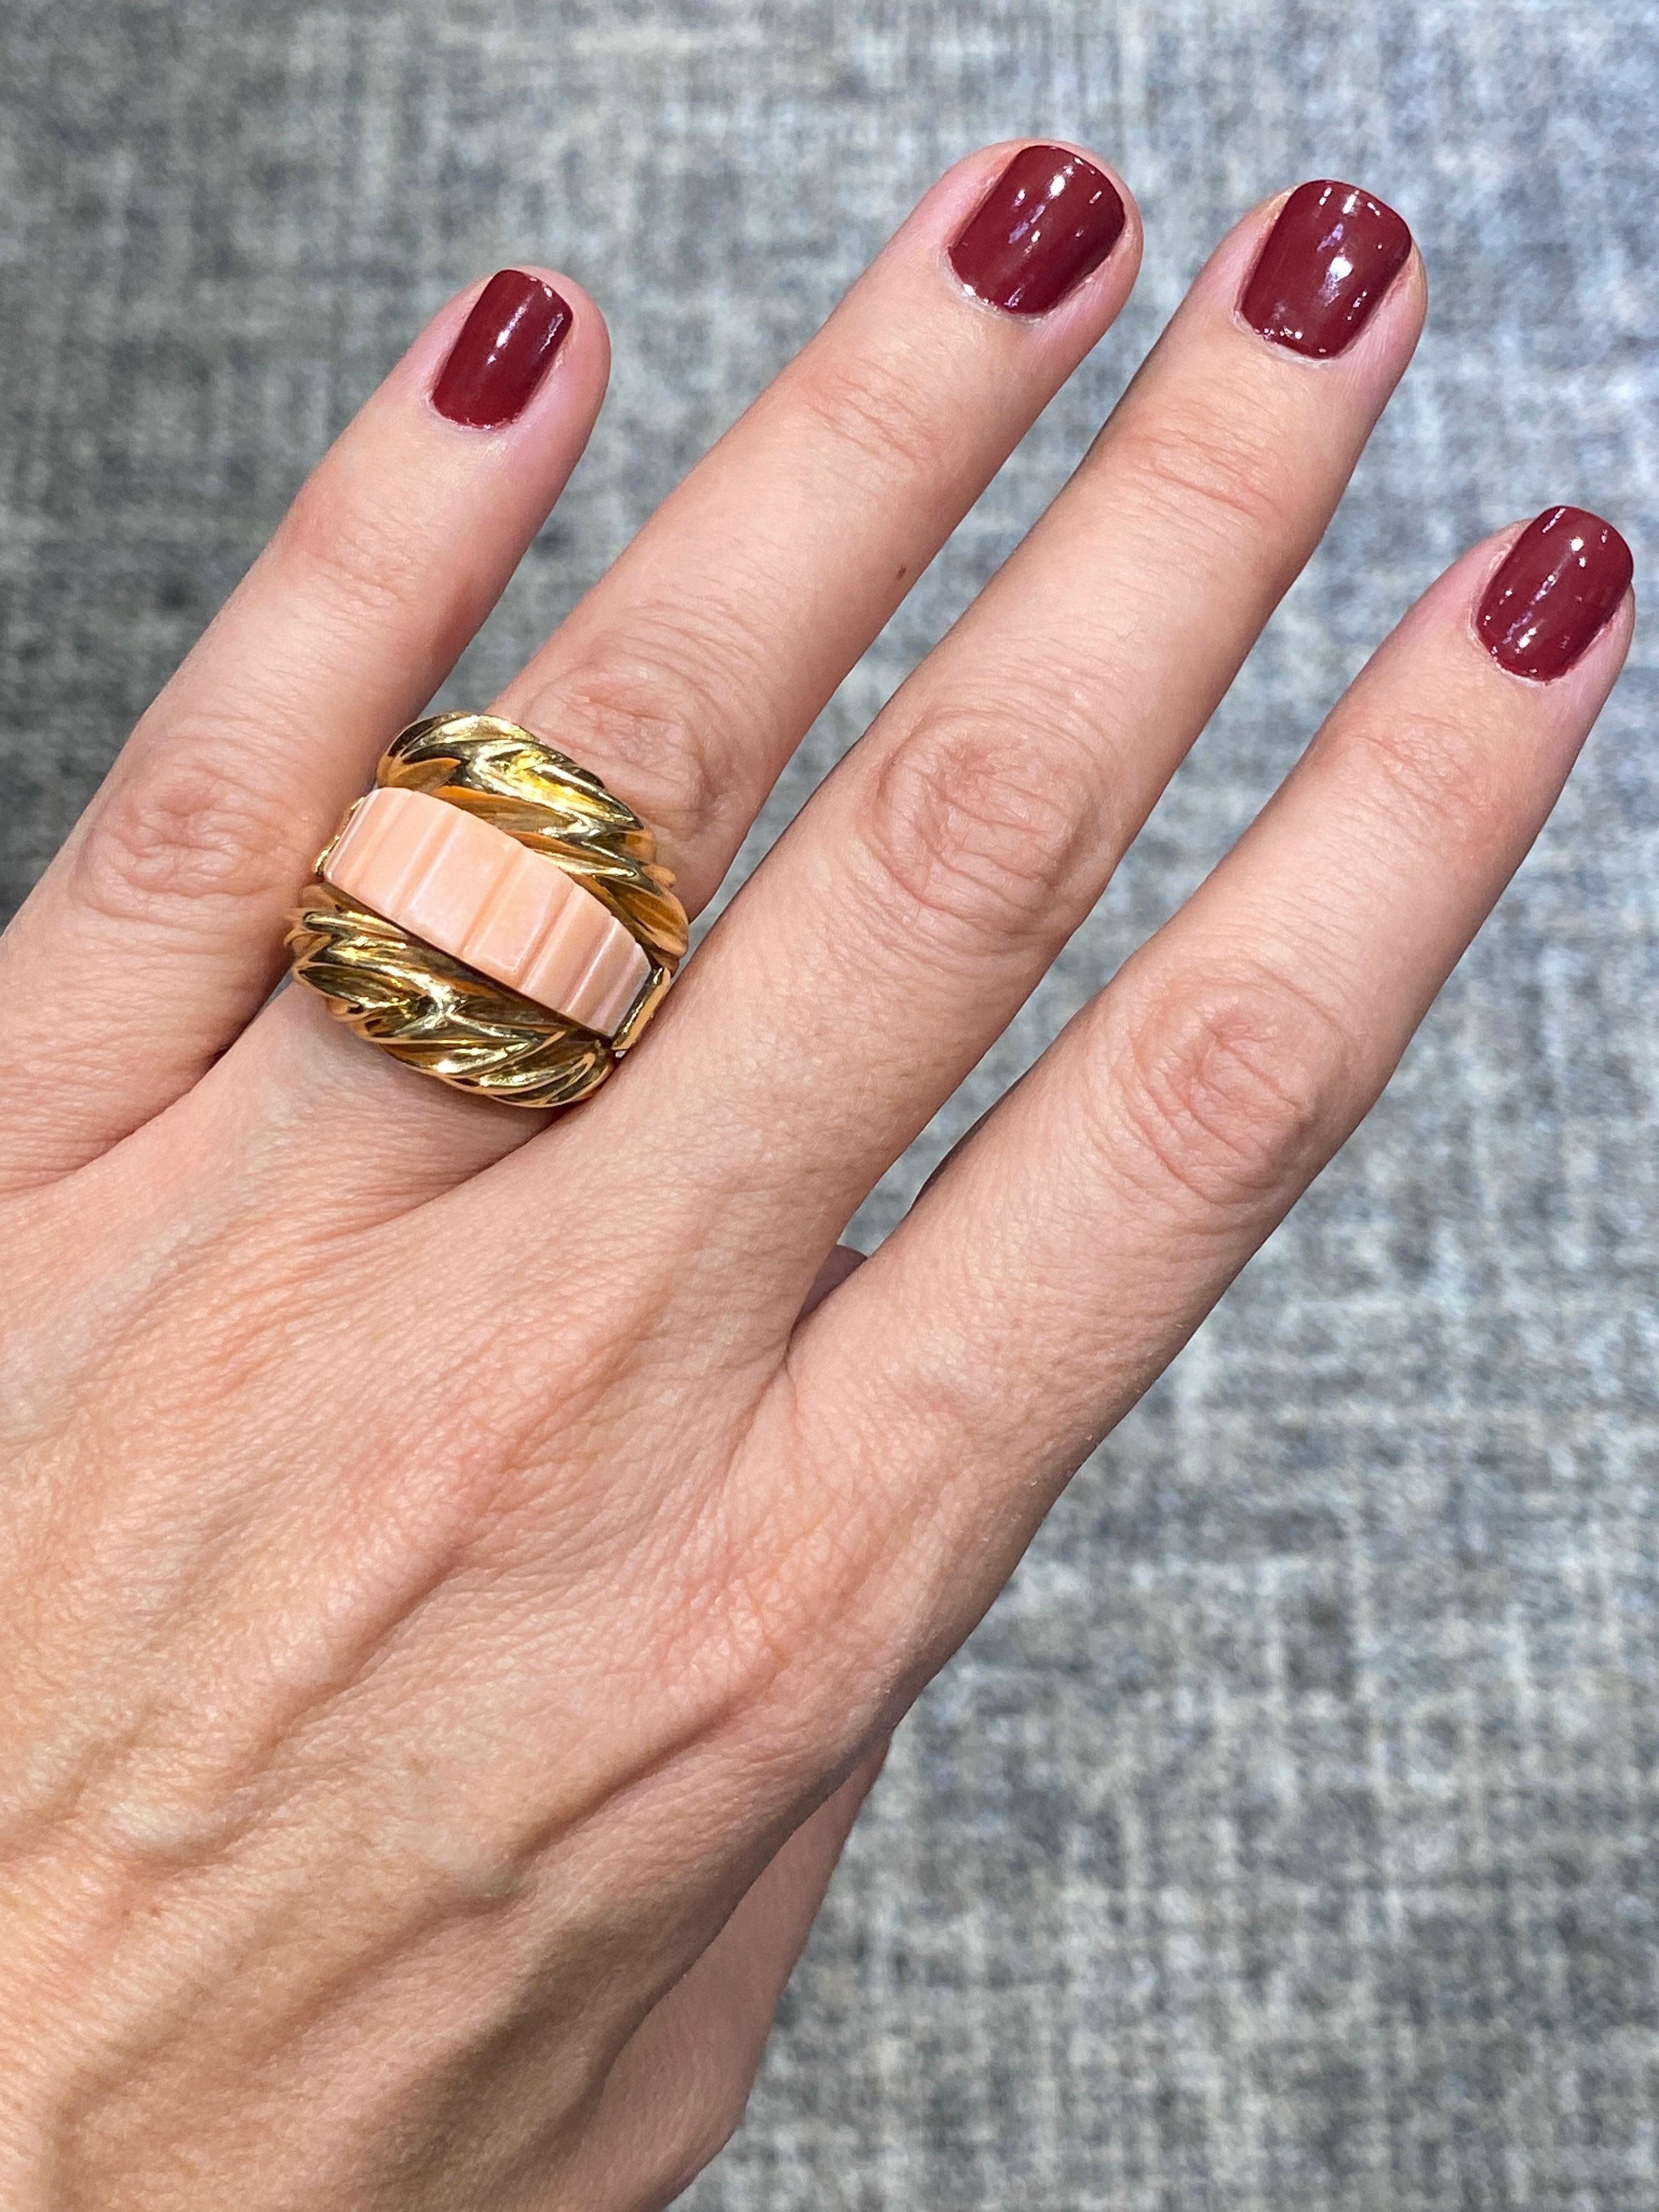 This unique Fred Paris 18 carat gold, coral and diamond cocktail ring features a single carved pink coral. It is a statement ring and can be enjoyed during the day or with an evening ensemble. An unusual piece, it would make an attractive addition